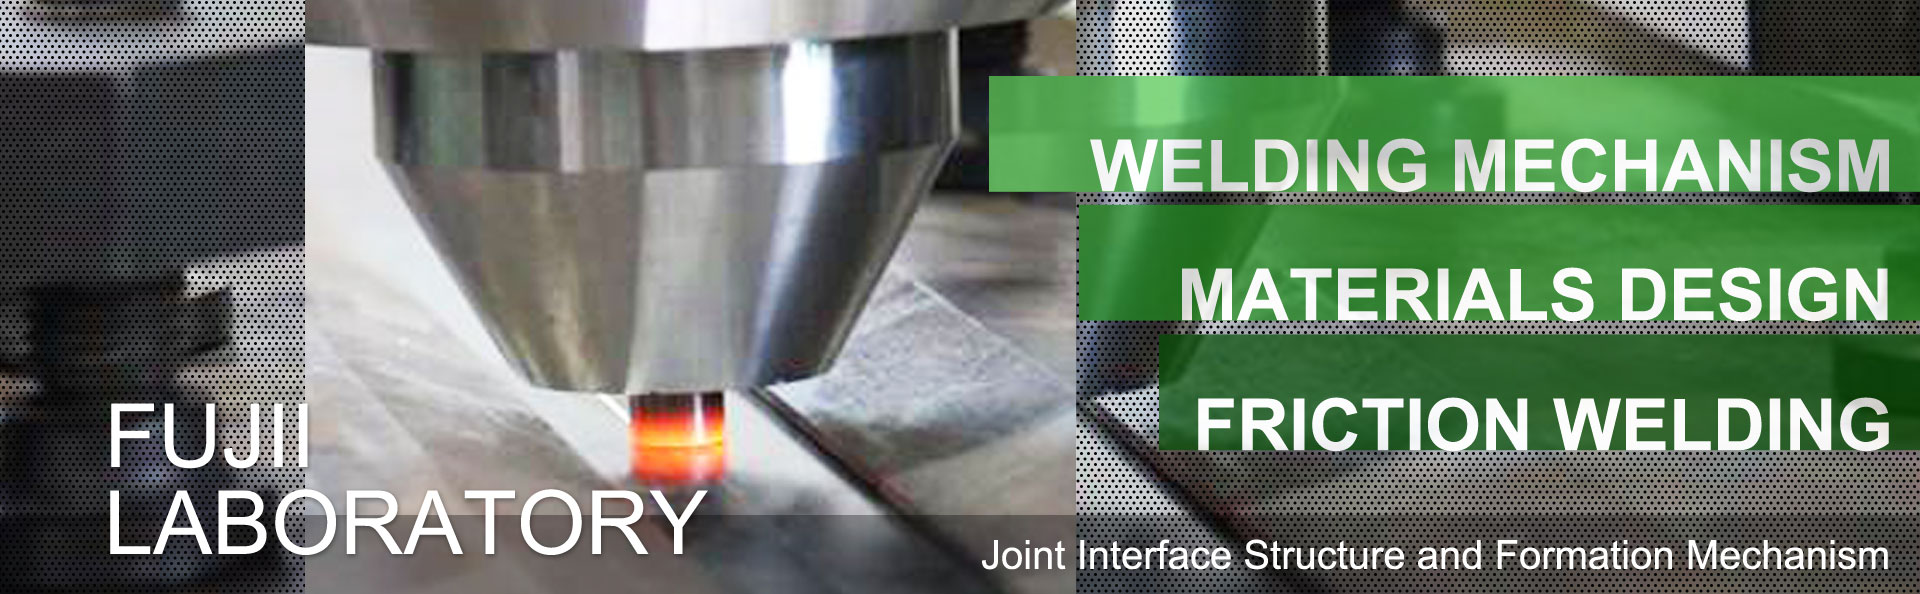 Joint Interface Structure and Formation Mechanism, Fujii Laboratory, WELDING MECHANISM, MATERIALS DESIGN, FRICTION WELDING